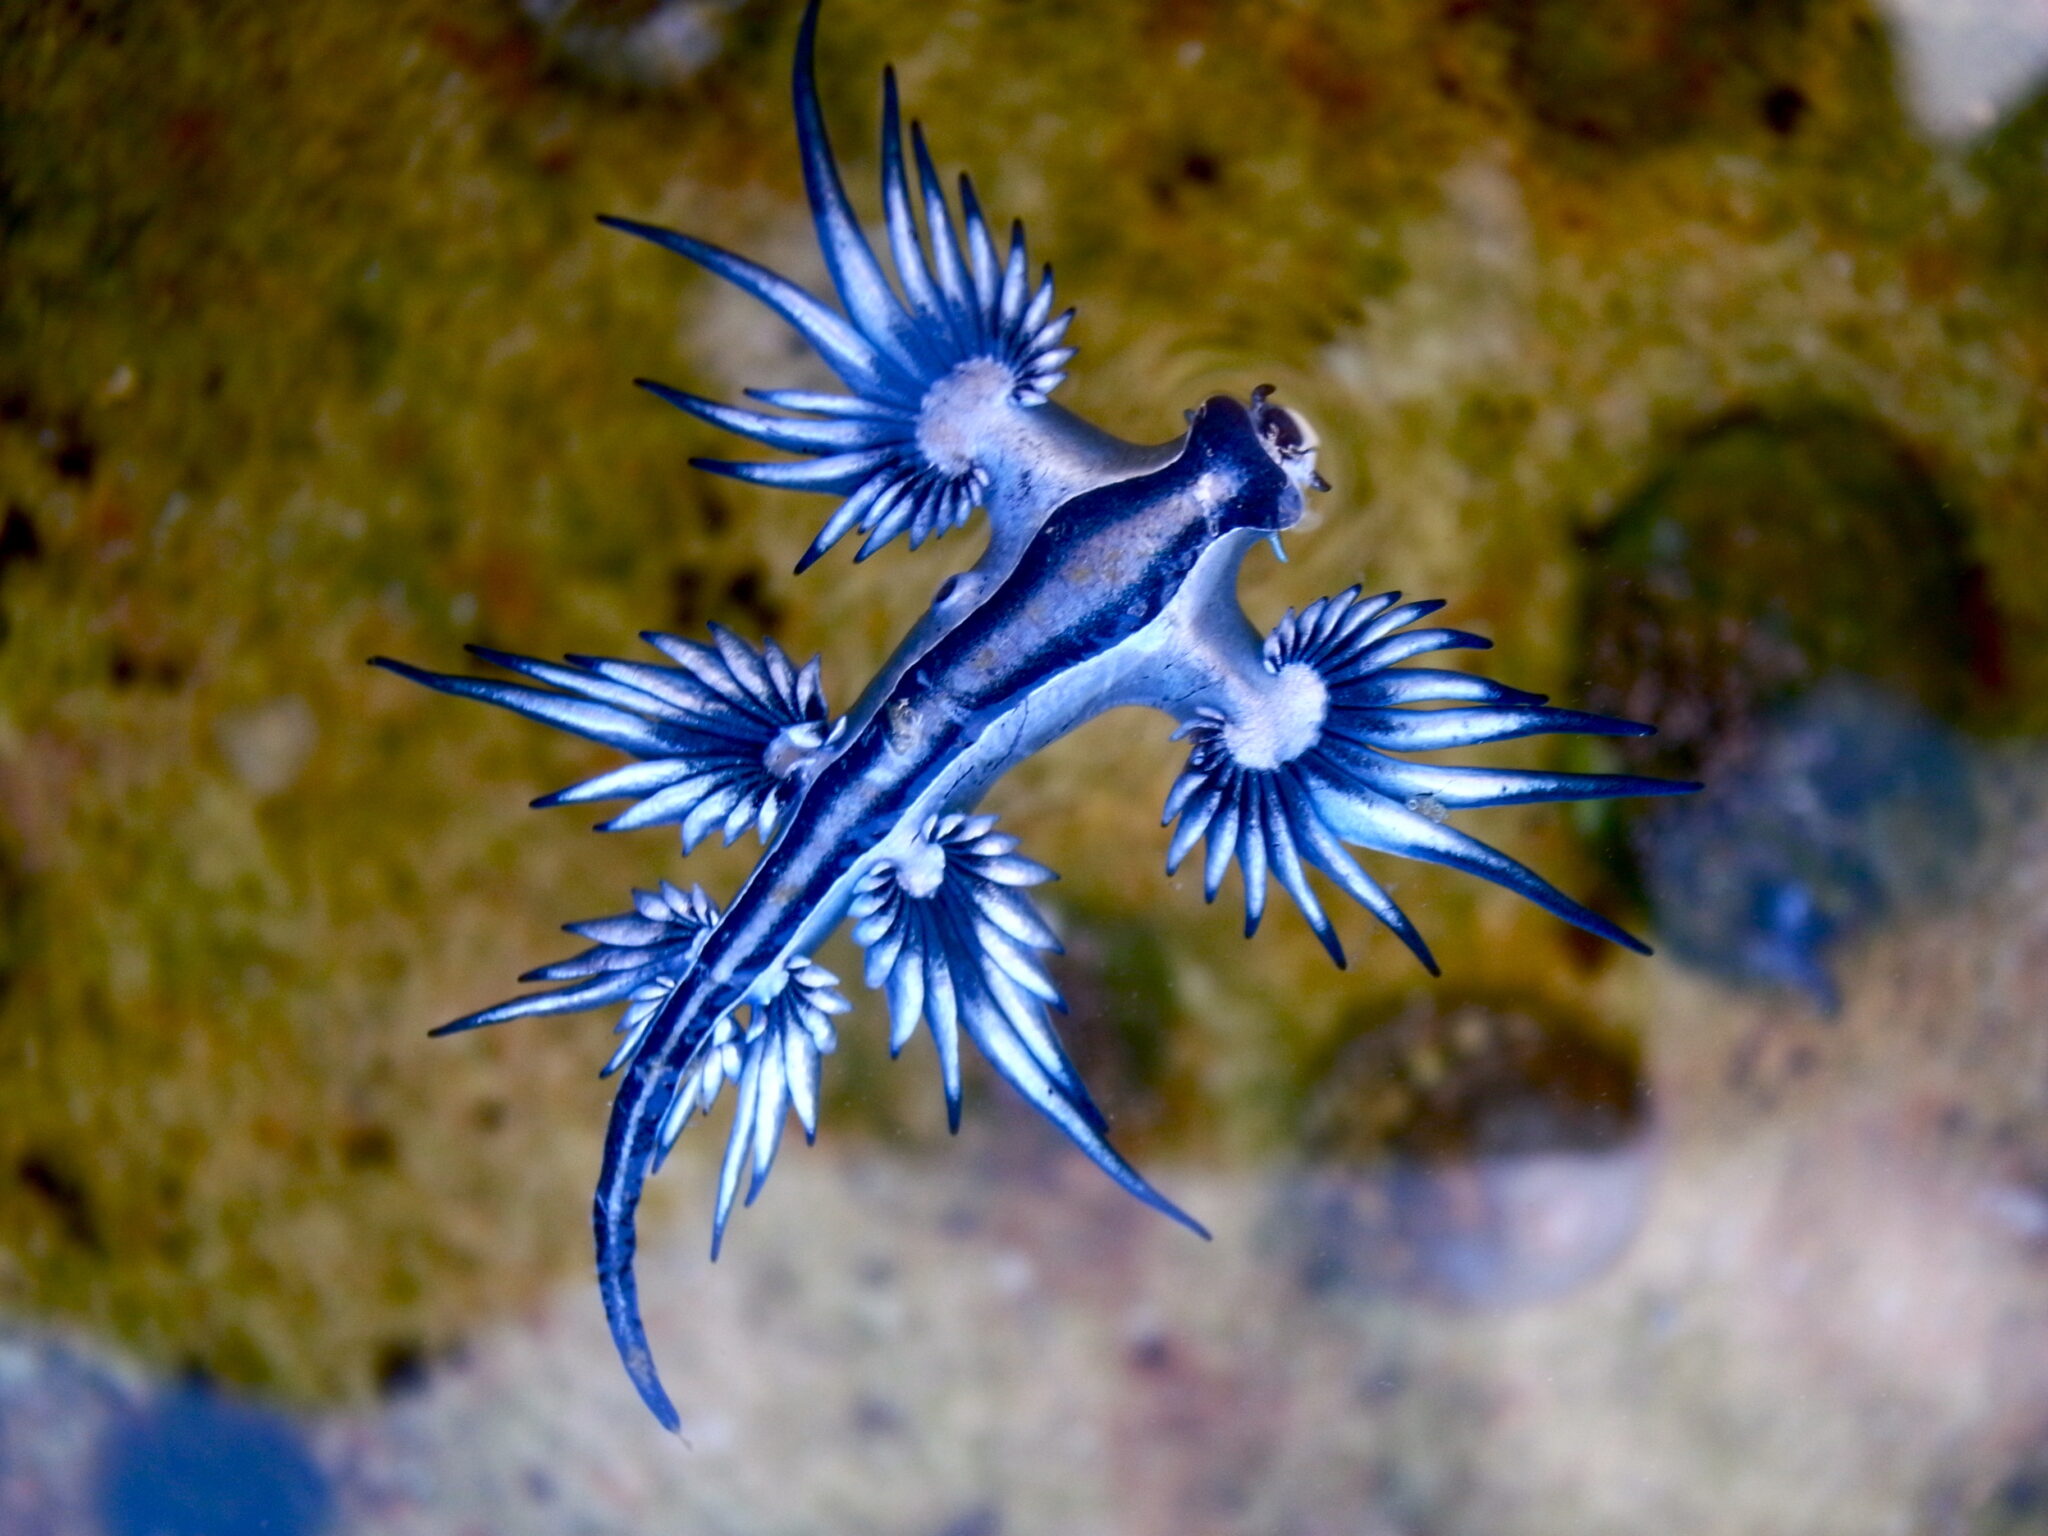 A blue dragon sea slug, Glaucus atlanticus, one of the more fascinating nudibranch species that are related to sea bunnies